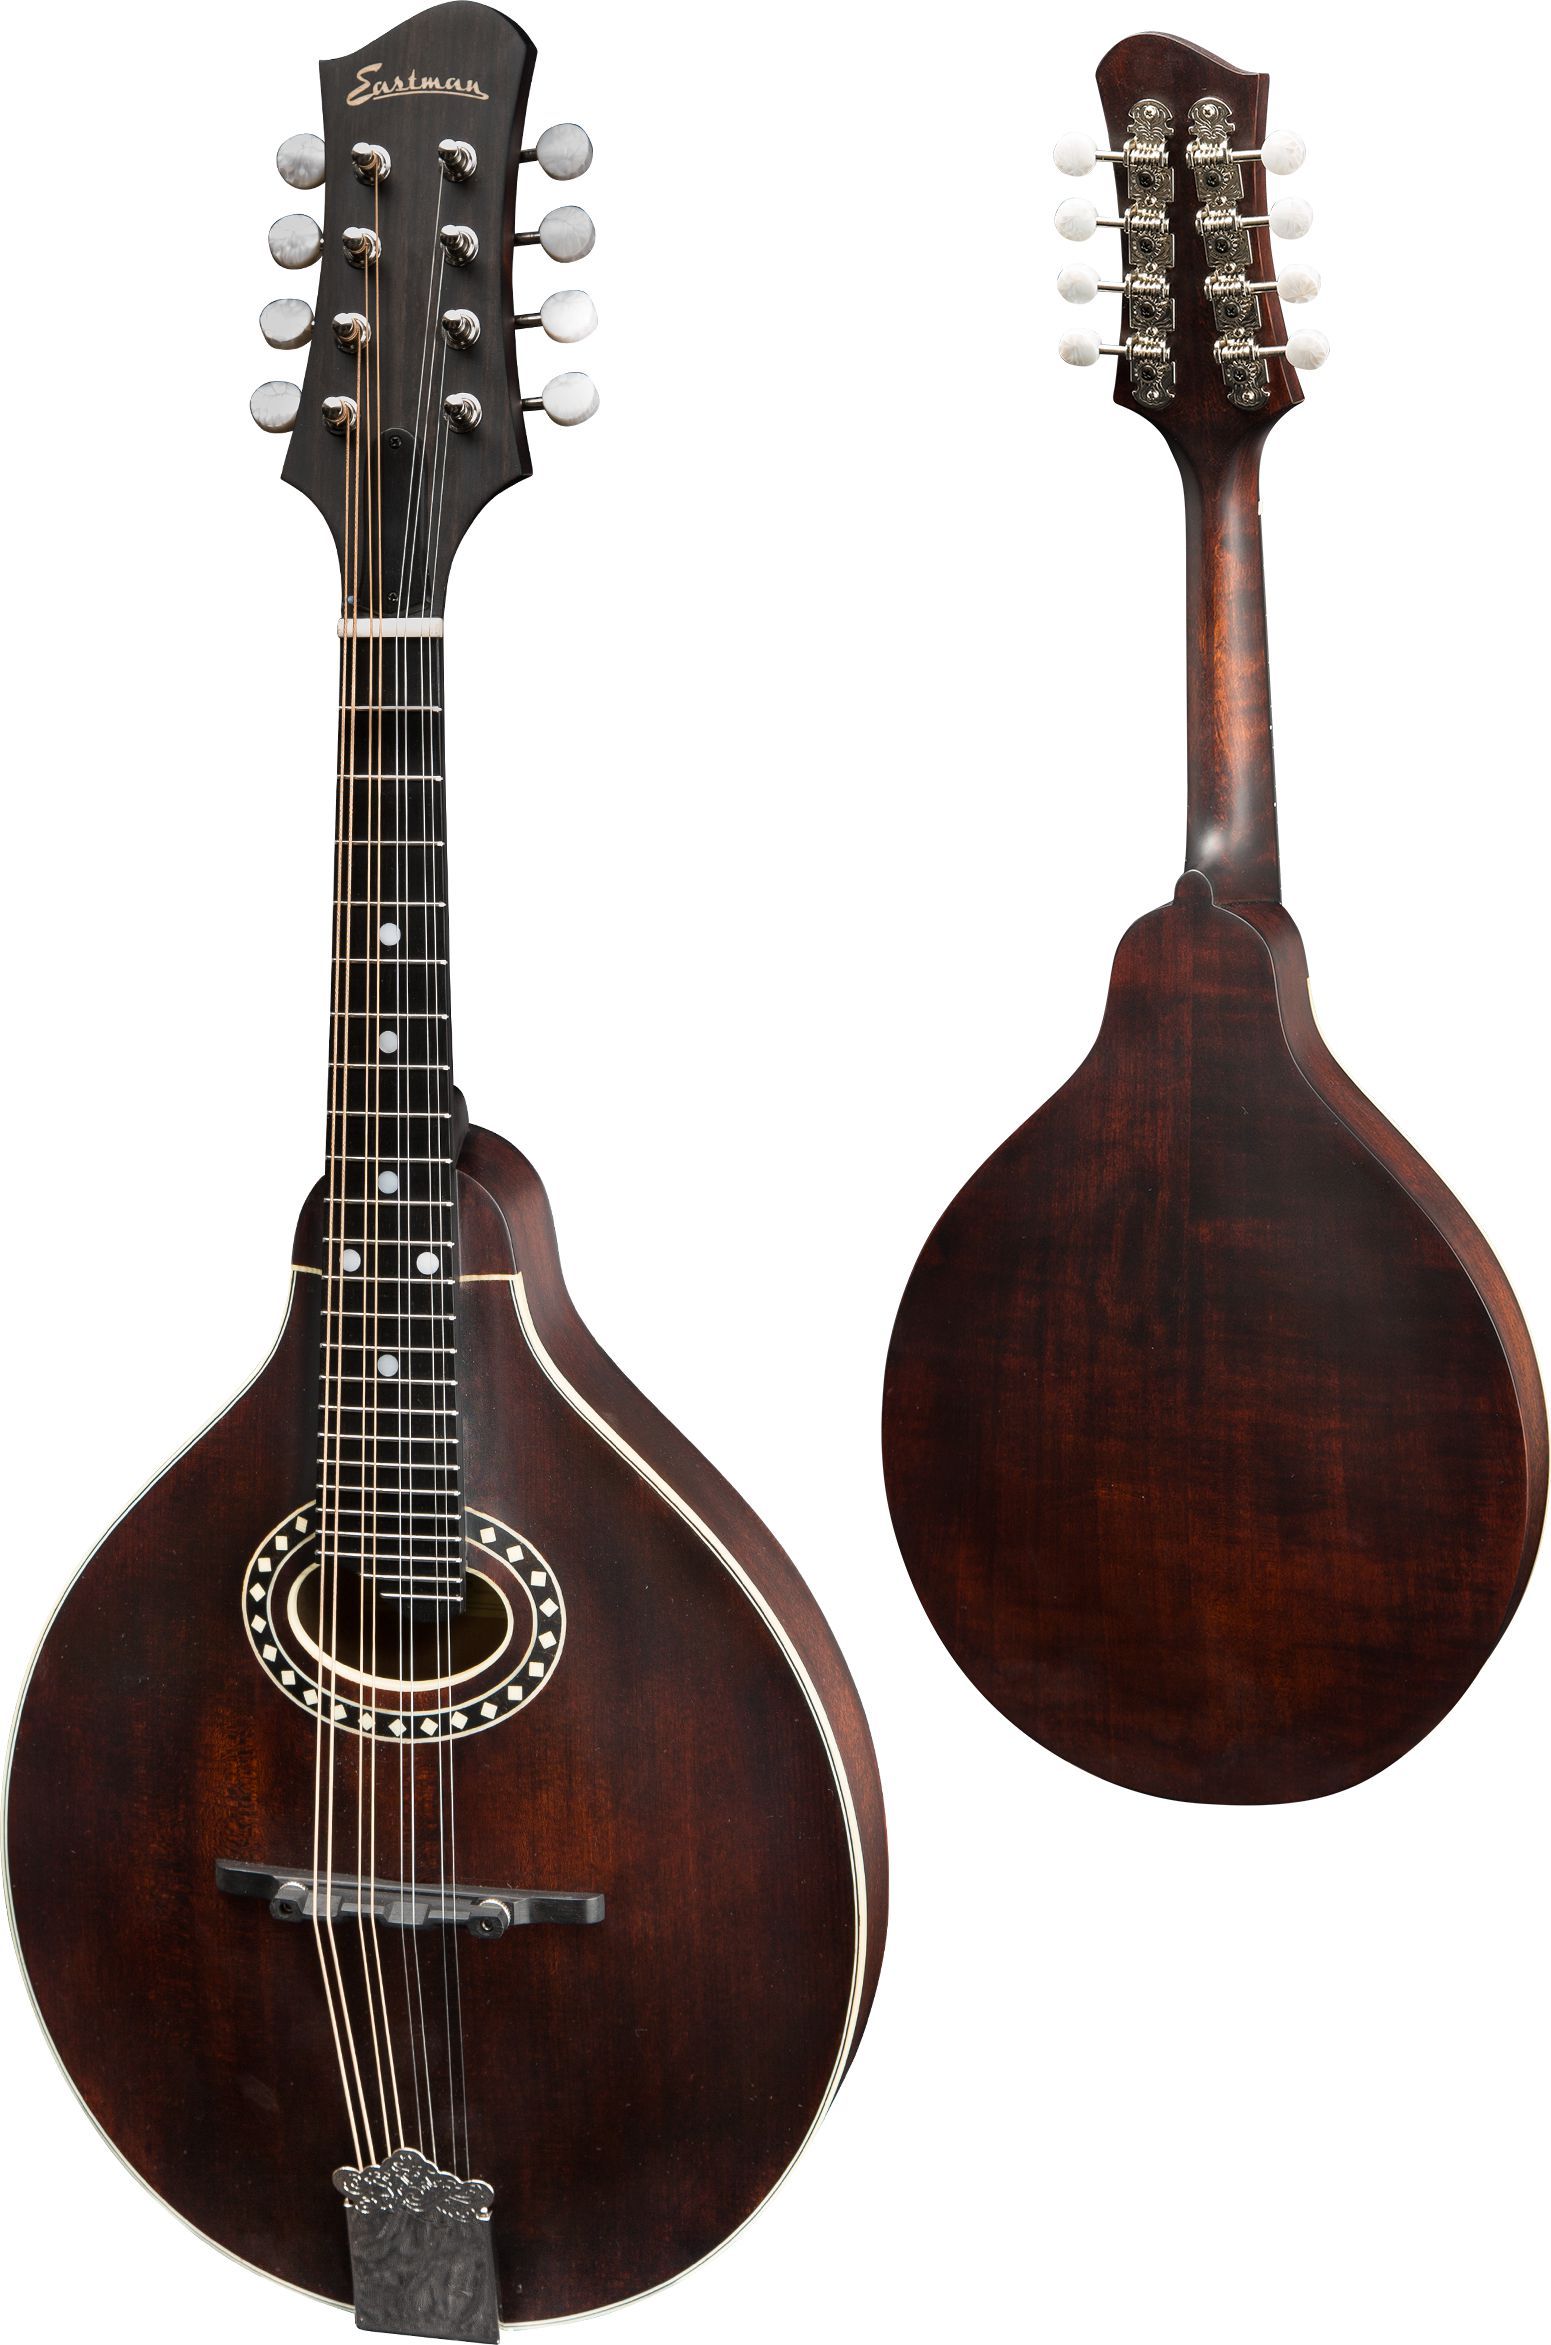 Mandolin - Eastman MD304L A-style Mandolin (oval Hole, Solid Spruce Top, Solid Maple Back And Sides, W/Gigbag)